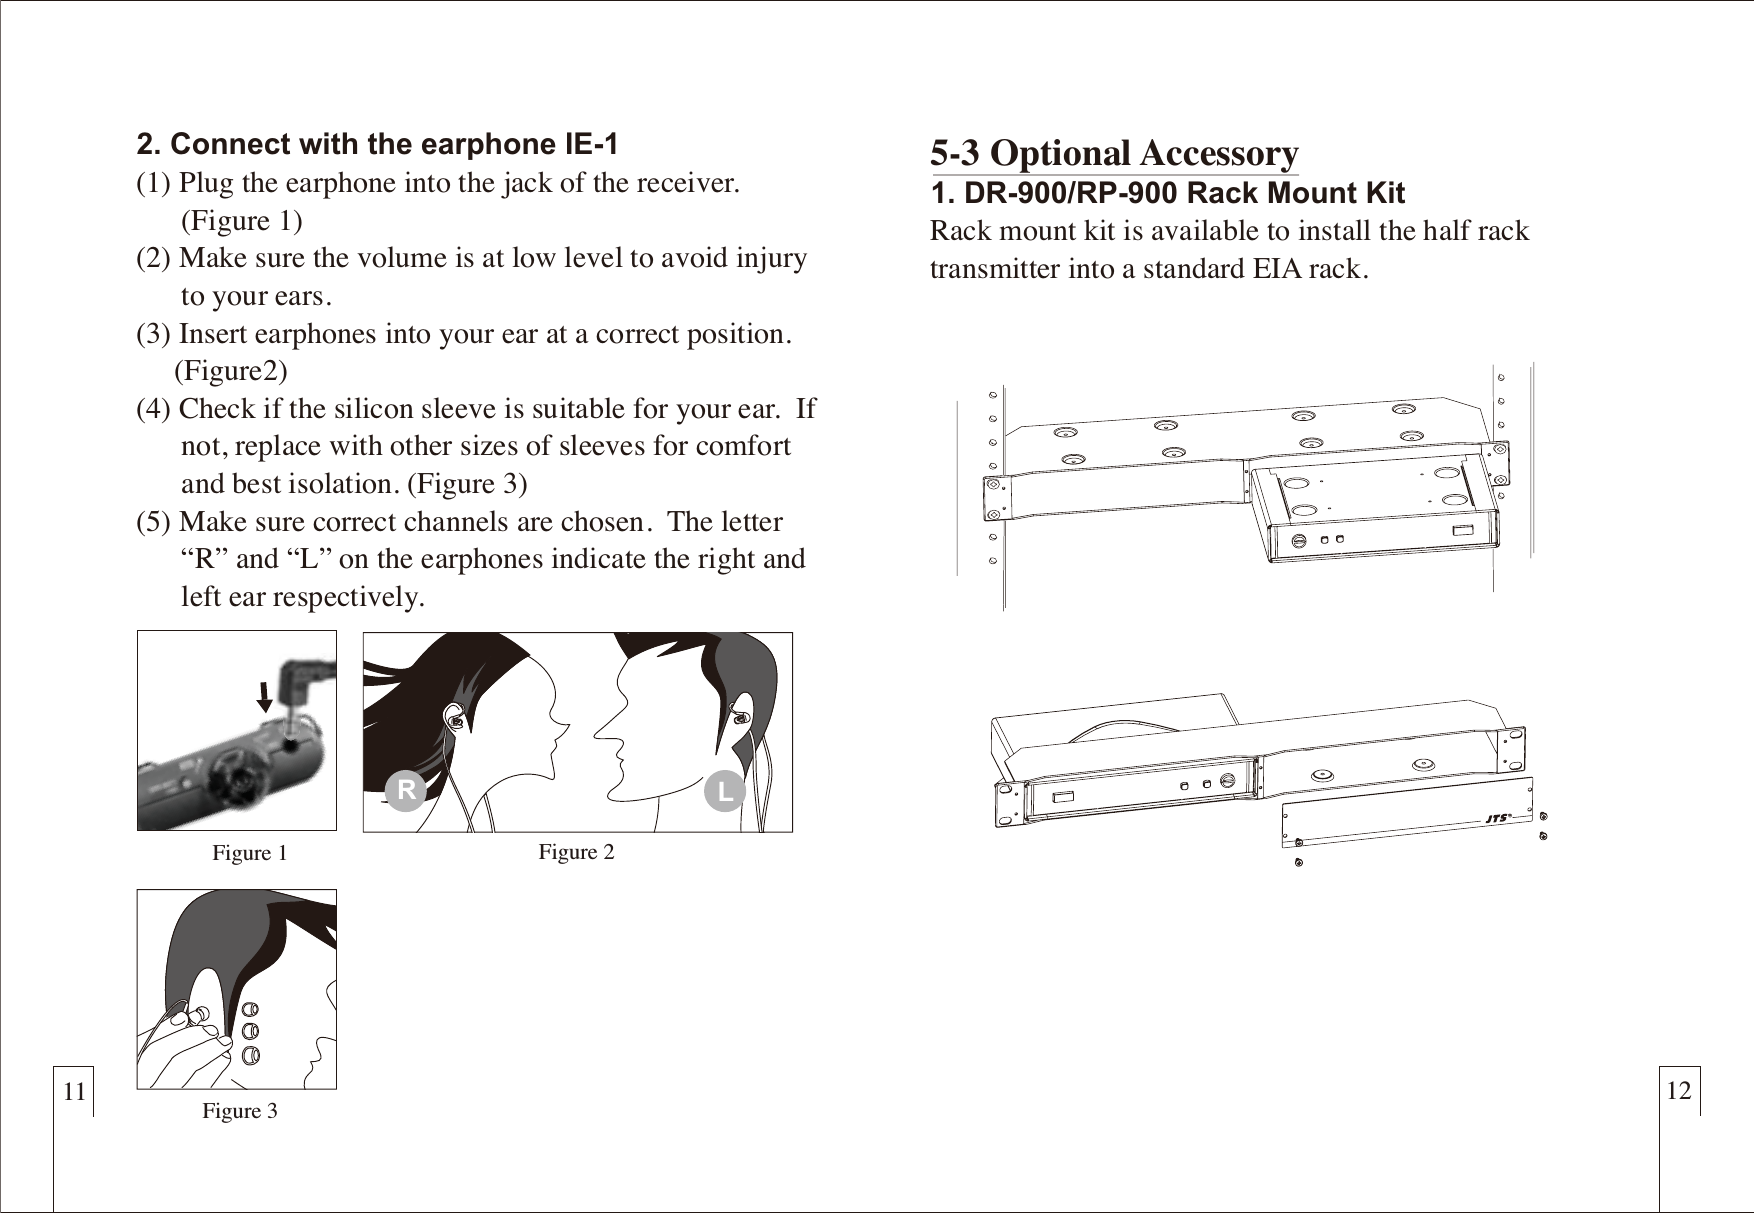 11 122. Connect with the earphone IE-1(1) Plug the earphone into the jack of the receiver.       (Figure 1)(2) Make sure the volume is at low level to avoid injury       to your ears.(3) Insert earphones into your ear at a correct position.      (Figure2)(4) Check if the silicon sleeve is suitable for your ear.  If       not, replace with other sizes of sleeves for comfort       and best isolation. (Figure 3)(5) Make sure correct channels are chosen.  The letter       “R” and “L” on the earphones indicate the right and       left ear respectively. 5-3 Optional Accessory1. DR-900/RP-900 Rack Mount KitRack mount kit is available to install the half rack transmitter into a standard EIA rack.Figure 3Figure 1 Figure 2RL